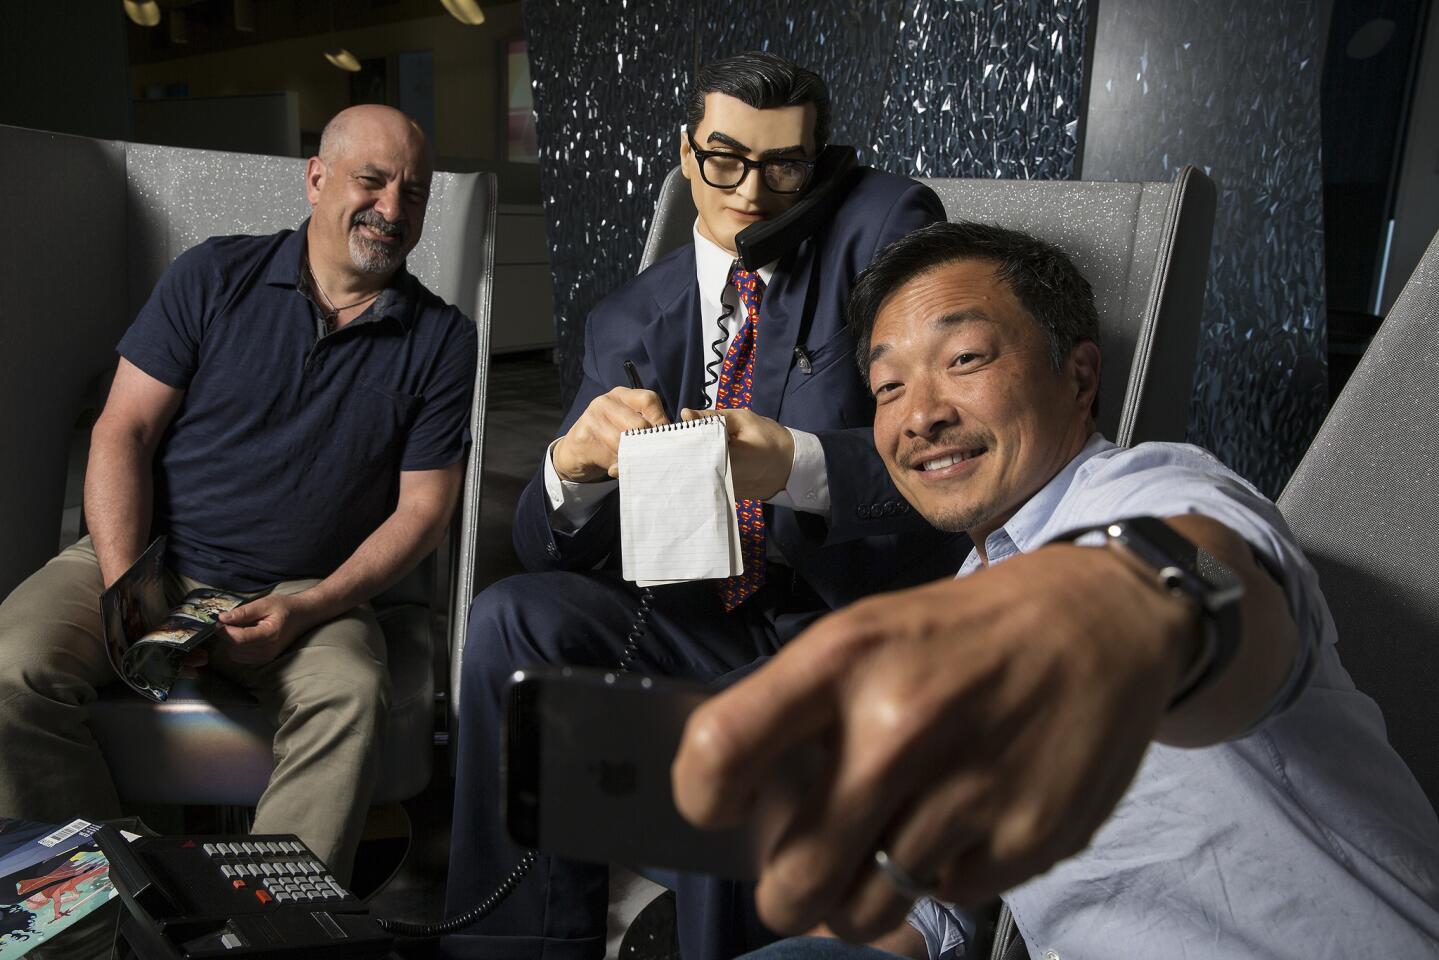 DC Entertainment publishers Dan Didio, left, and Jim Lee take more selfies with Clark Kent at the company headquarters in Burbank.